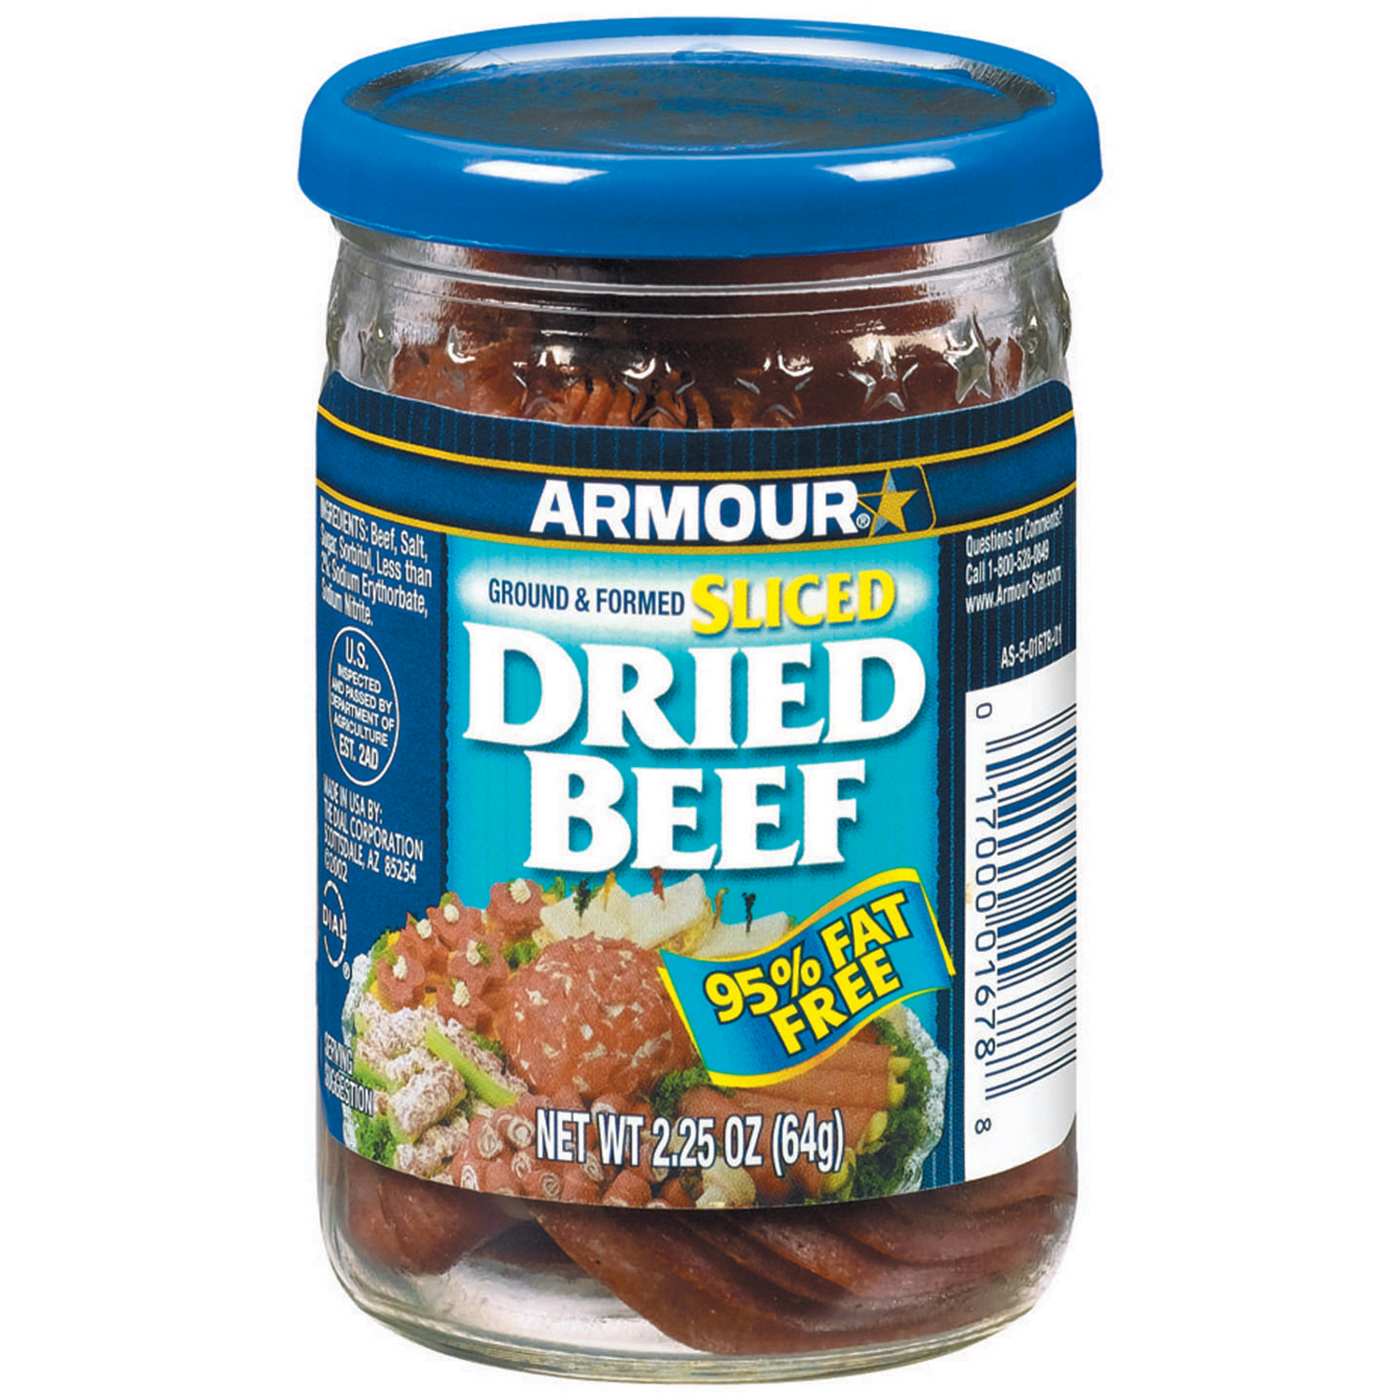 Armour Sliced Dried Beef Canned Meat; image 1 of 4